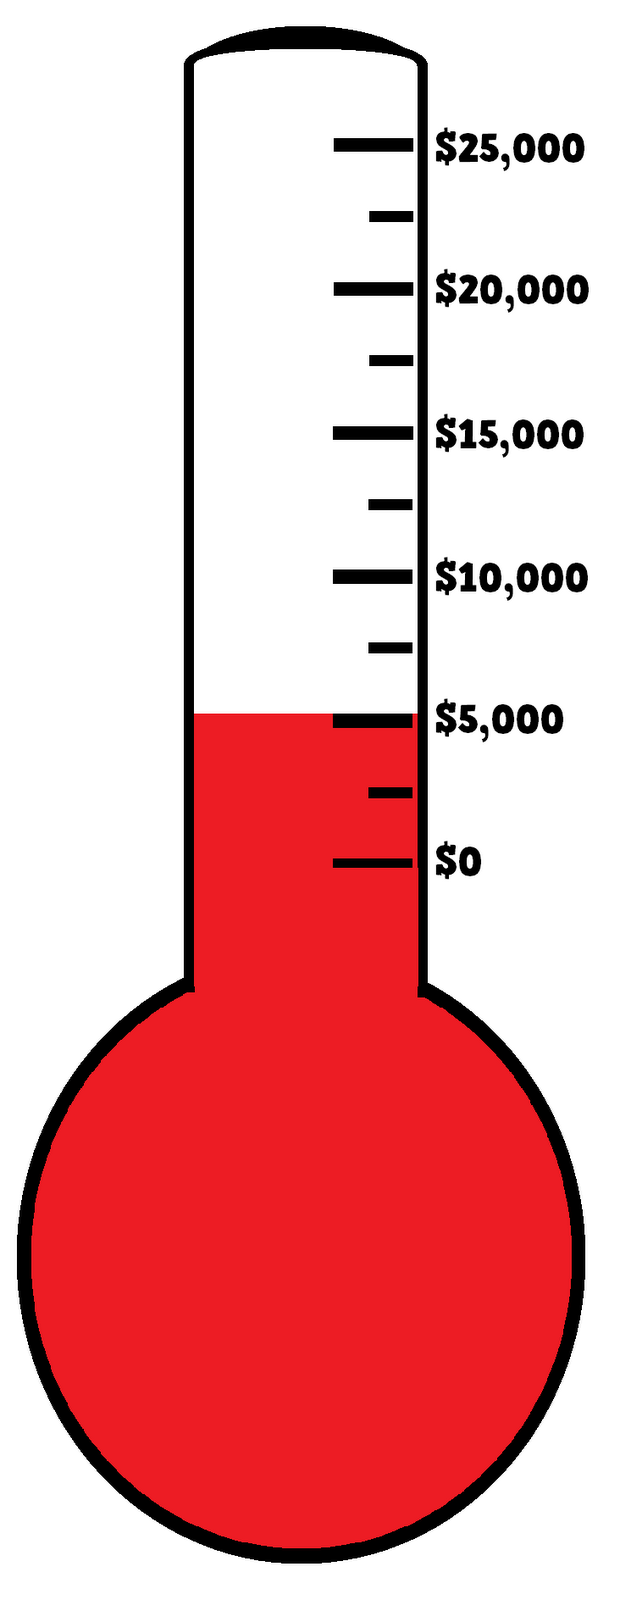 Blank Fundraising Thermometer Template | Free Download Clip Art ...